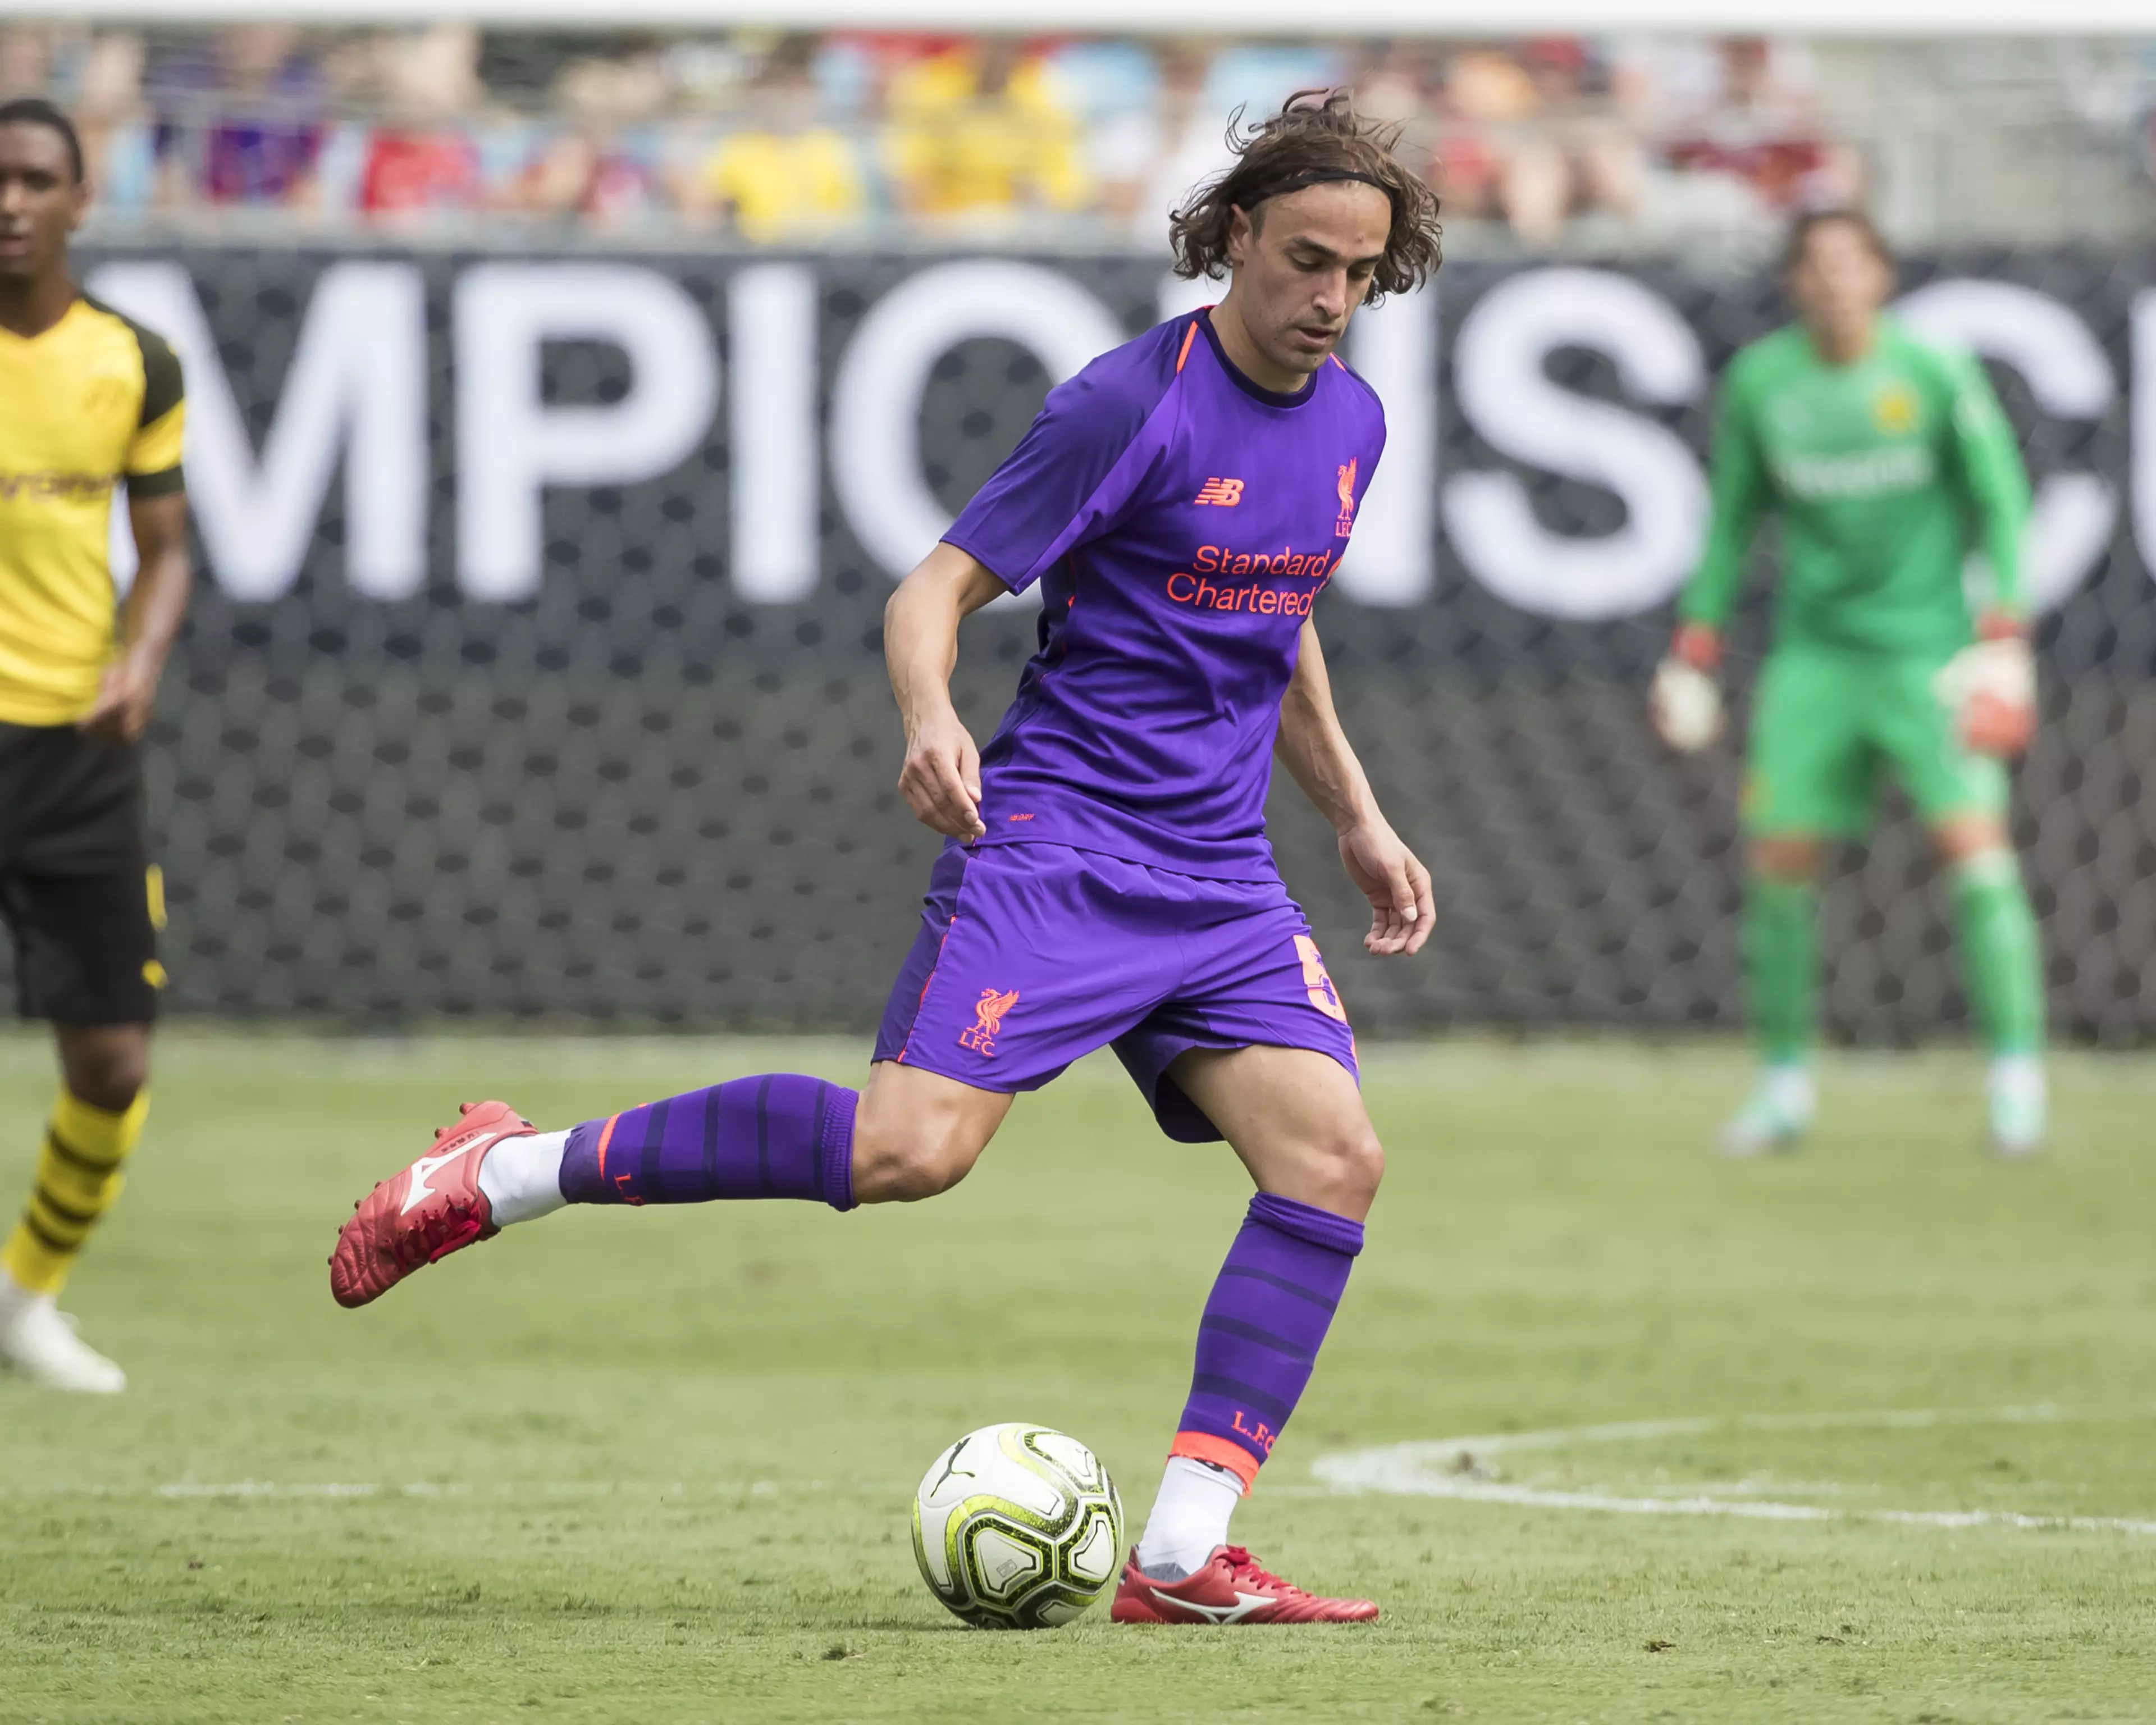 Markovic played in a friendly in the summer. Image: PA Images